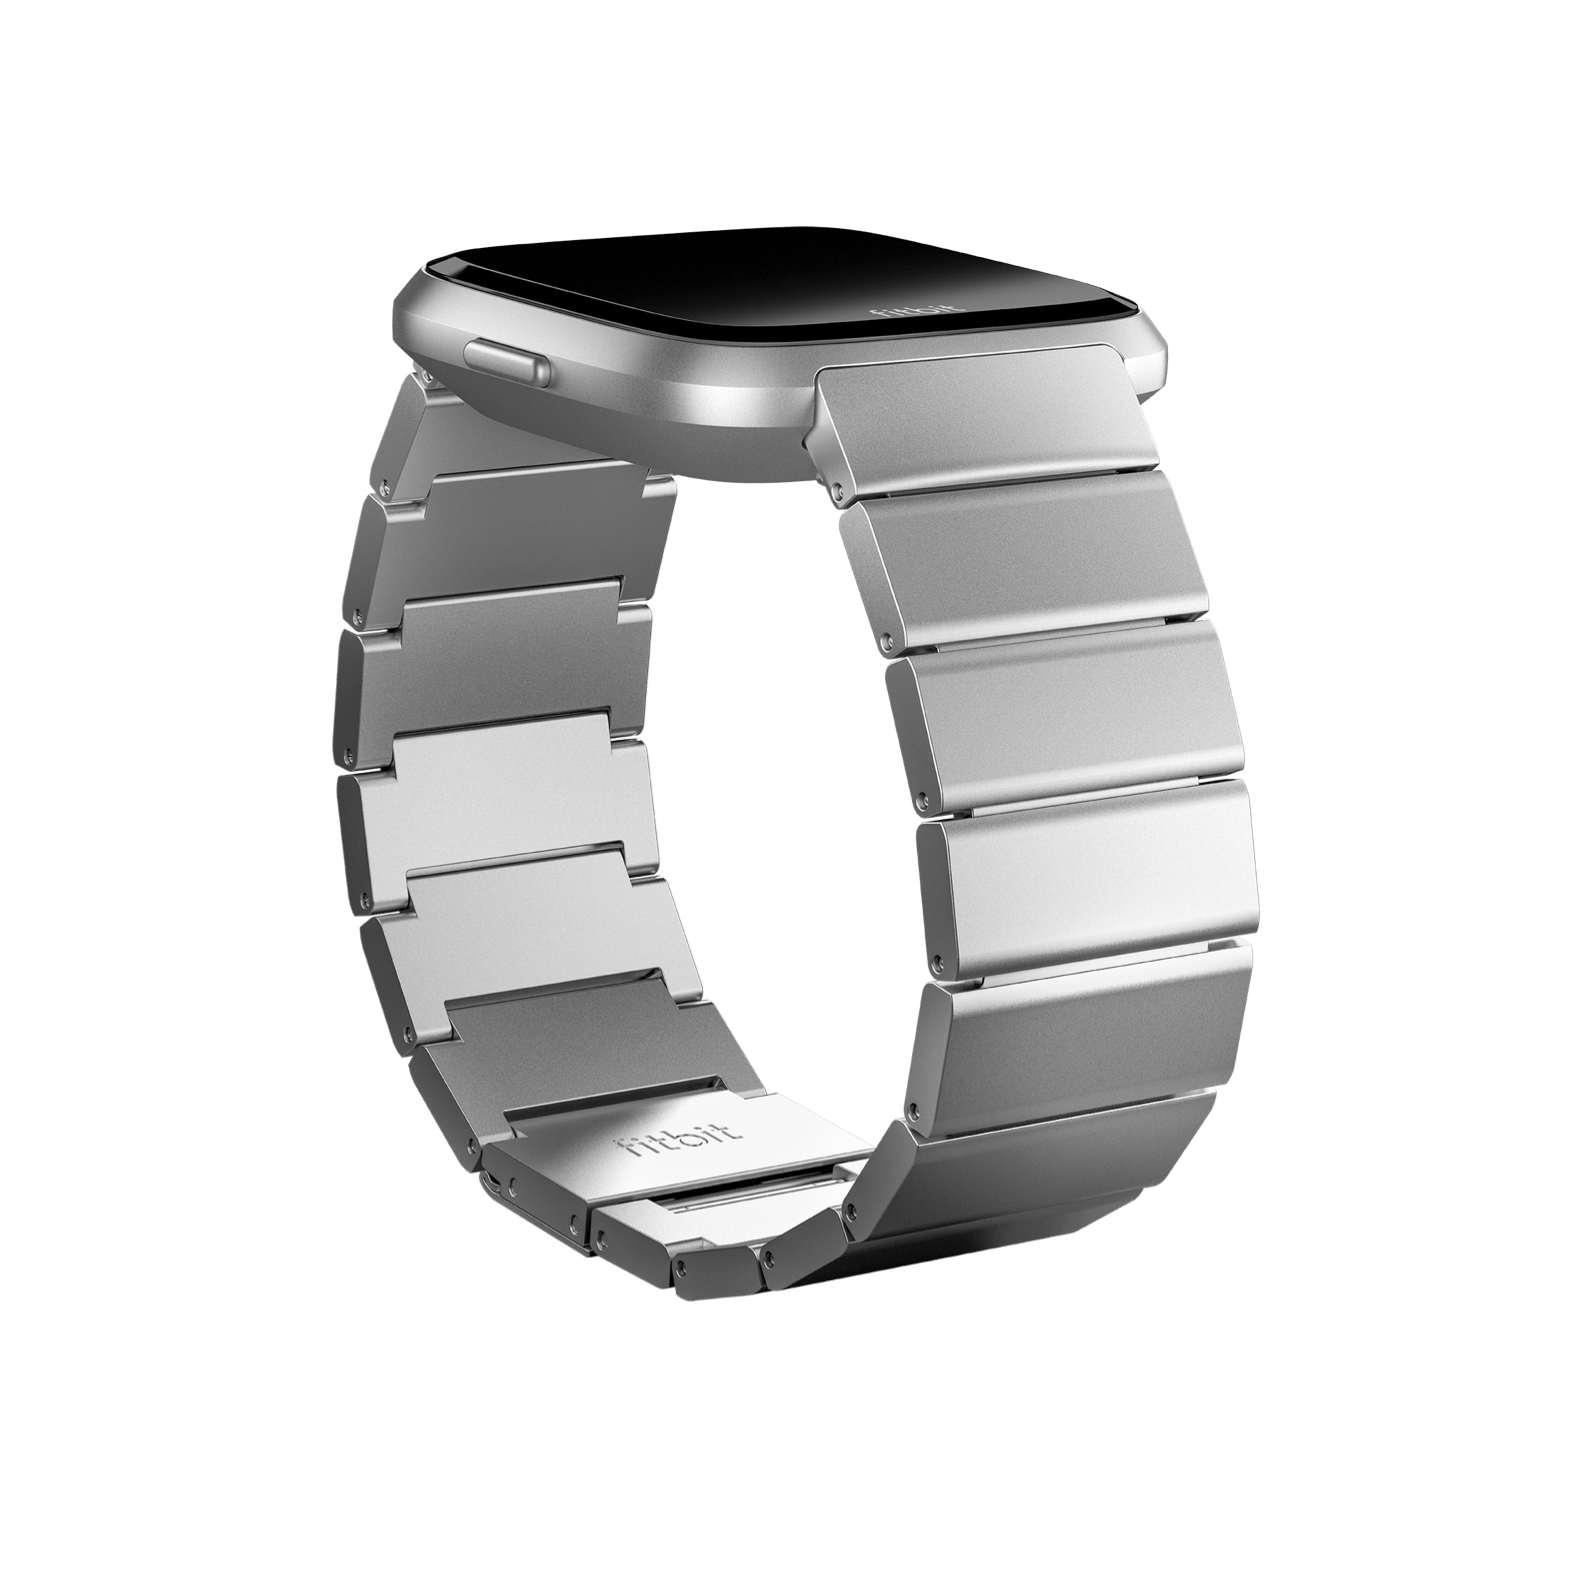 fitbit stainless steel band